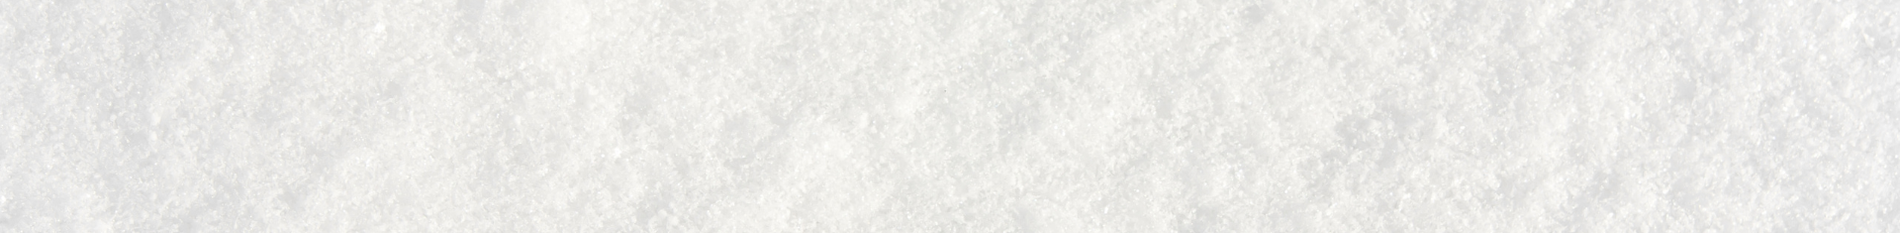 Blog-Banner-classic-snowball-cocktail-recipe